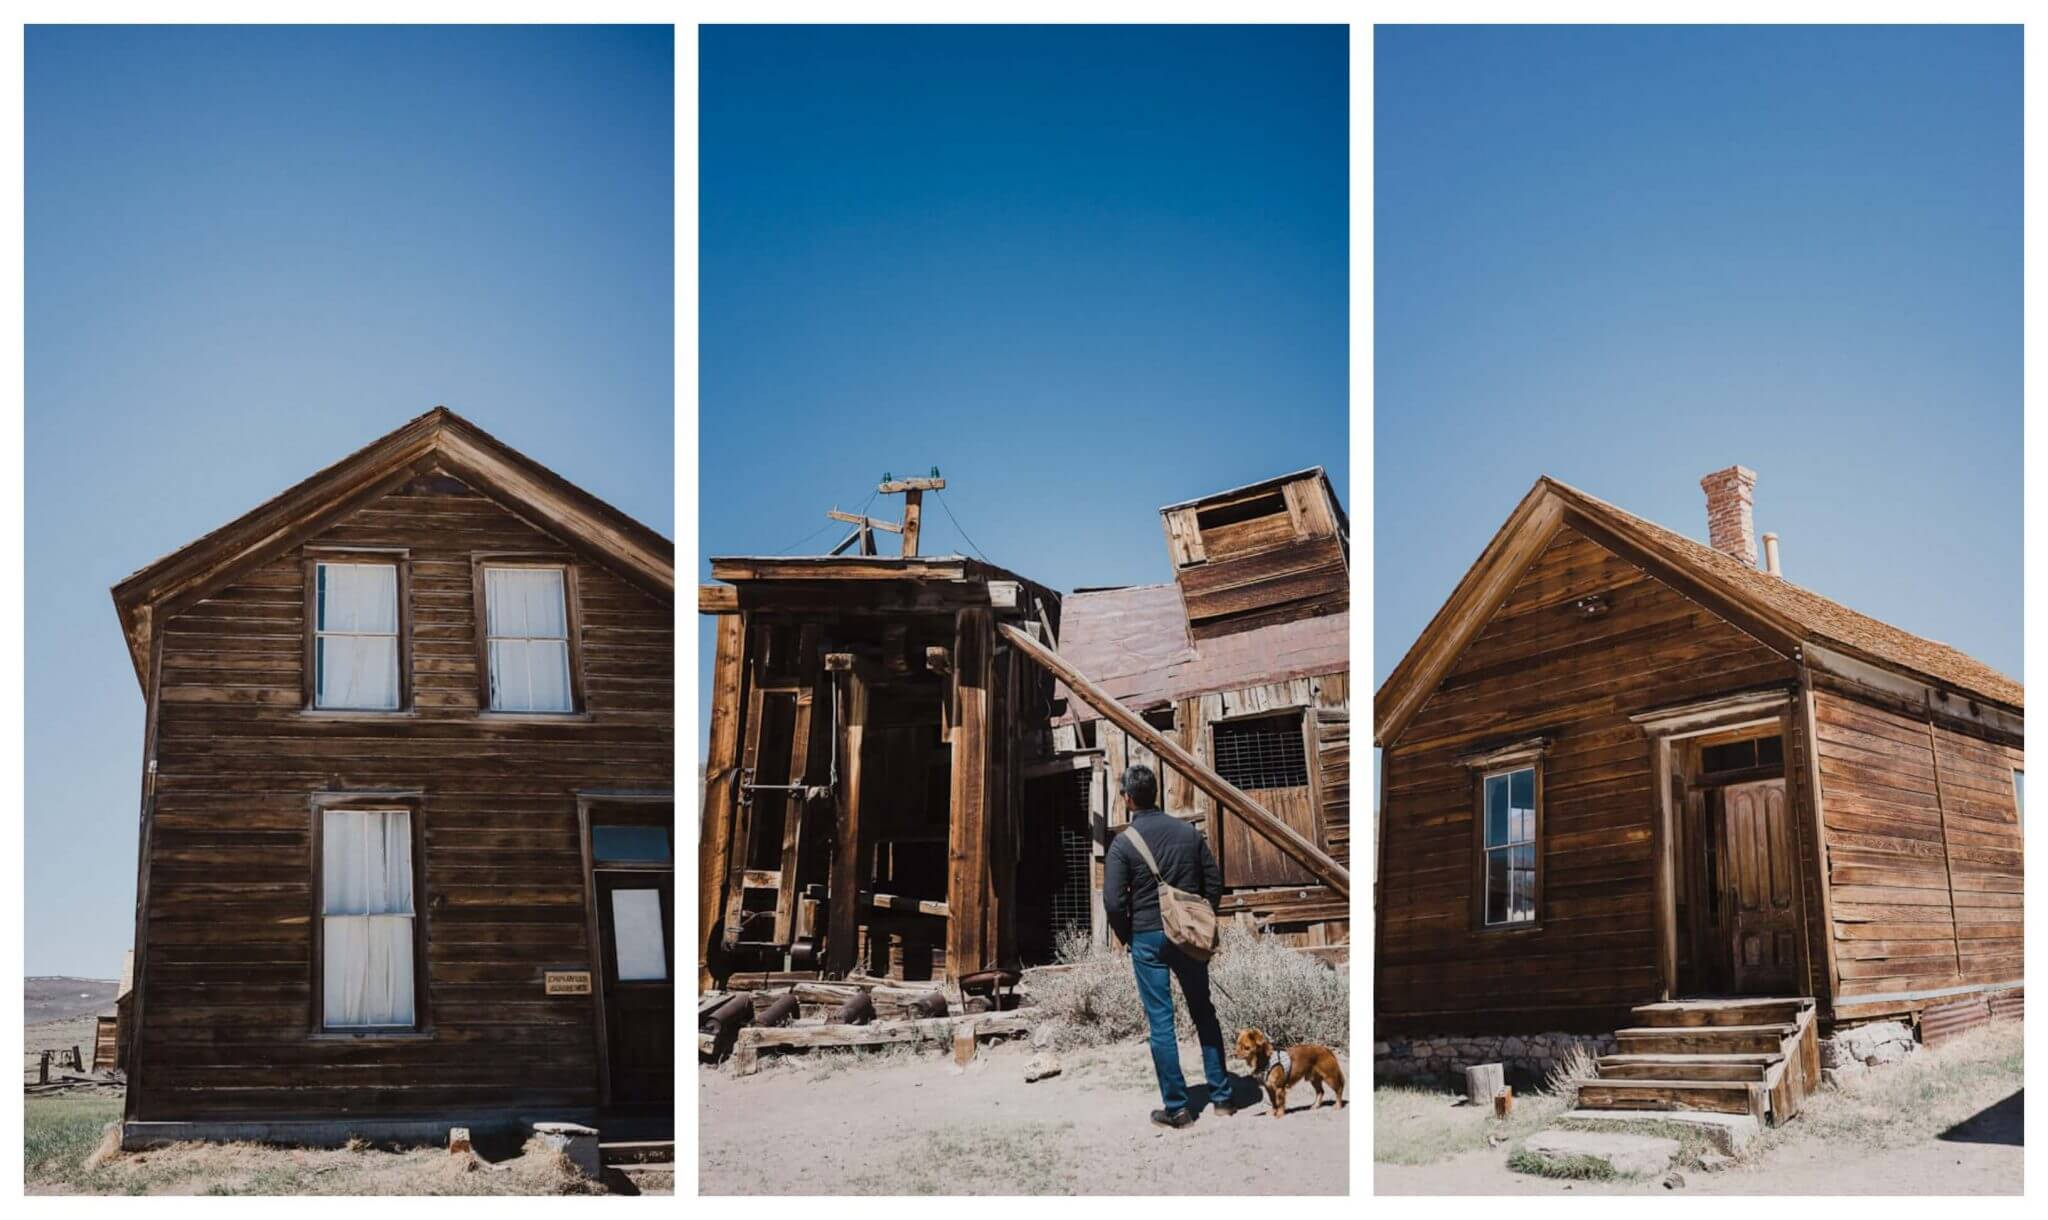 Self guided tour of Bodie ghost town in Mono County